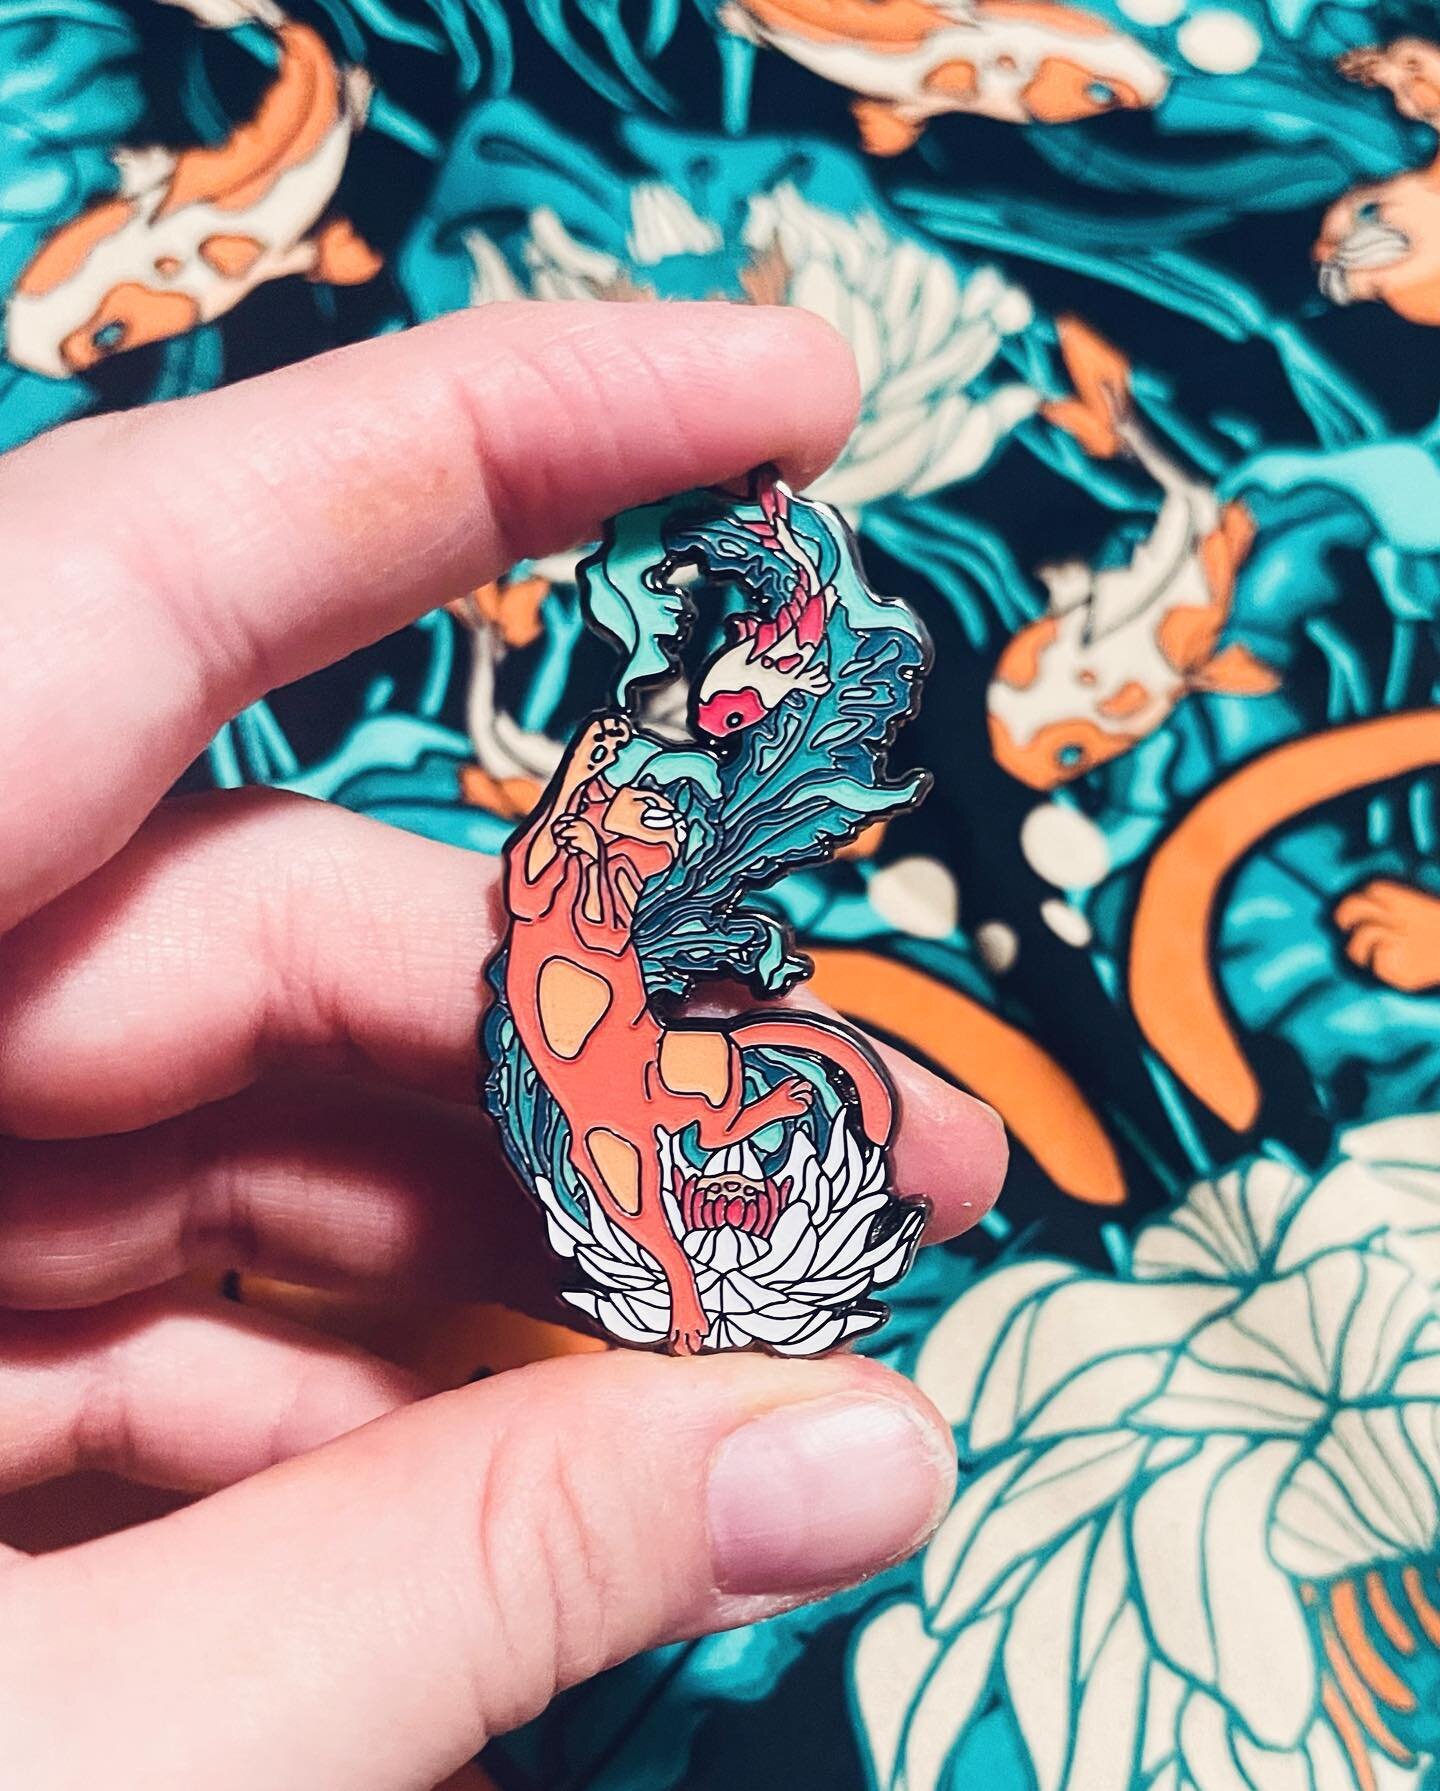 Pop Cats is coming up fast, March 23 &amp; 24 in Seattle! I&rsquo;ll have cat pins, stickers, prints and more at my booth. If you can&rsquo;t make it out, cat merch will be available on my website after the event 😸
-
-
-
#cat #catlover #catlife #cat